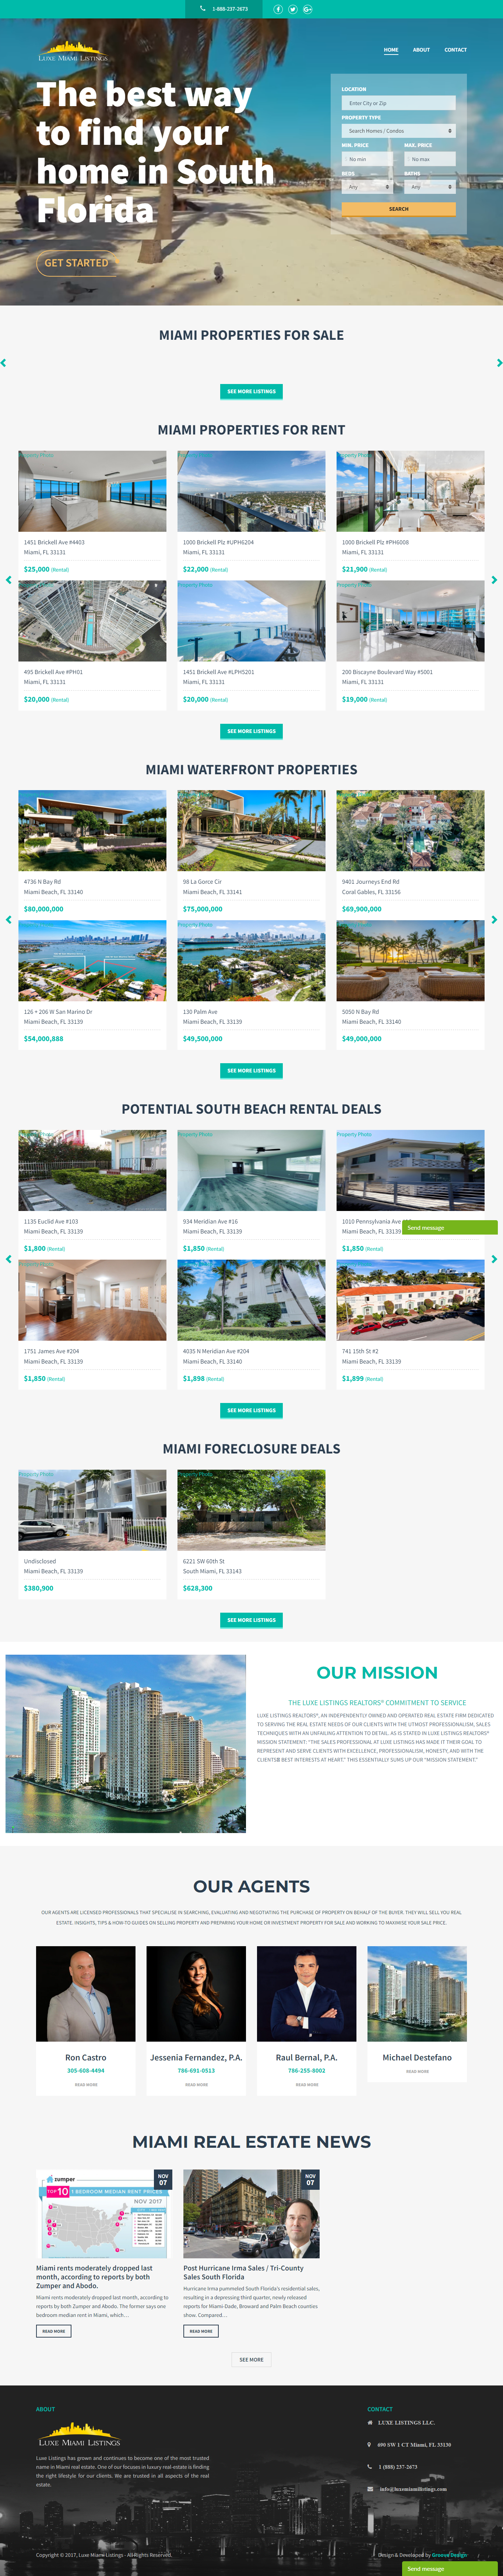 Luxe Miami Listings